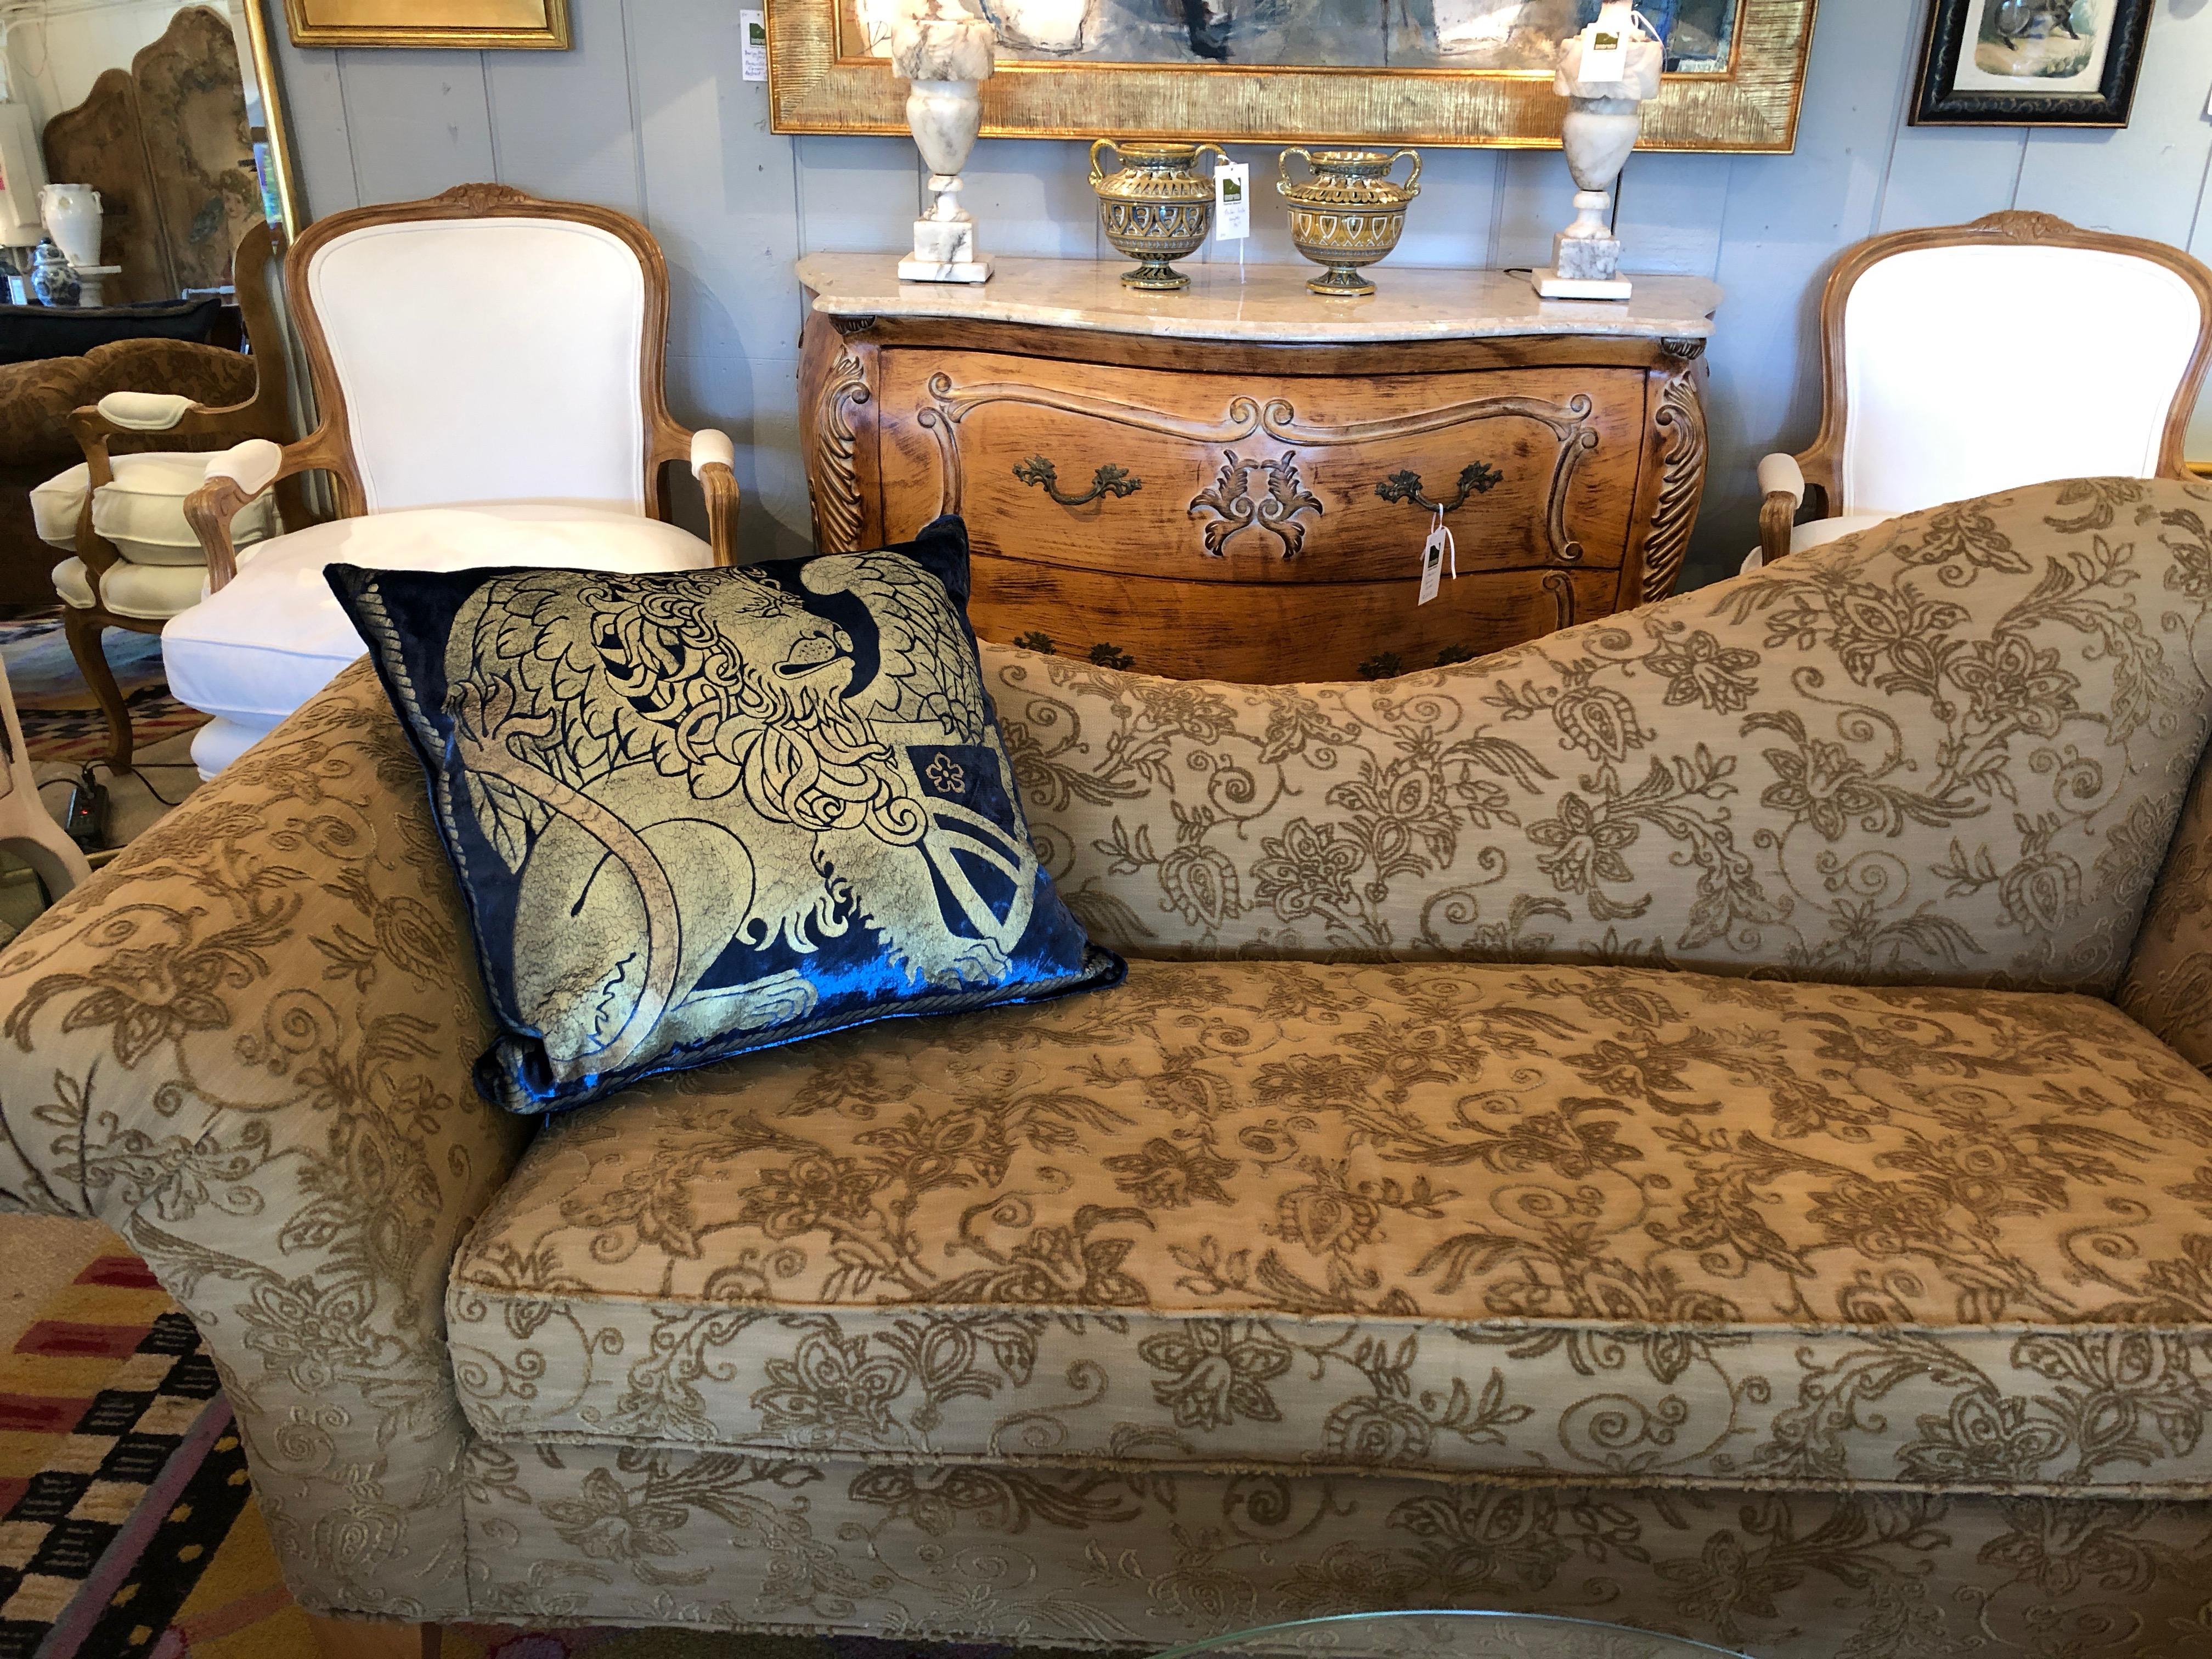 Eye-catching and regal pillow from Venice with a Venetian gold lion with shield set against a dark blue velvet; back side is satin.